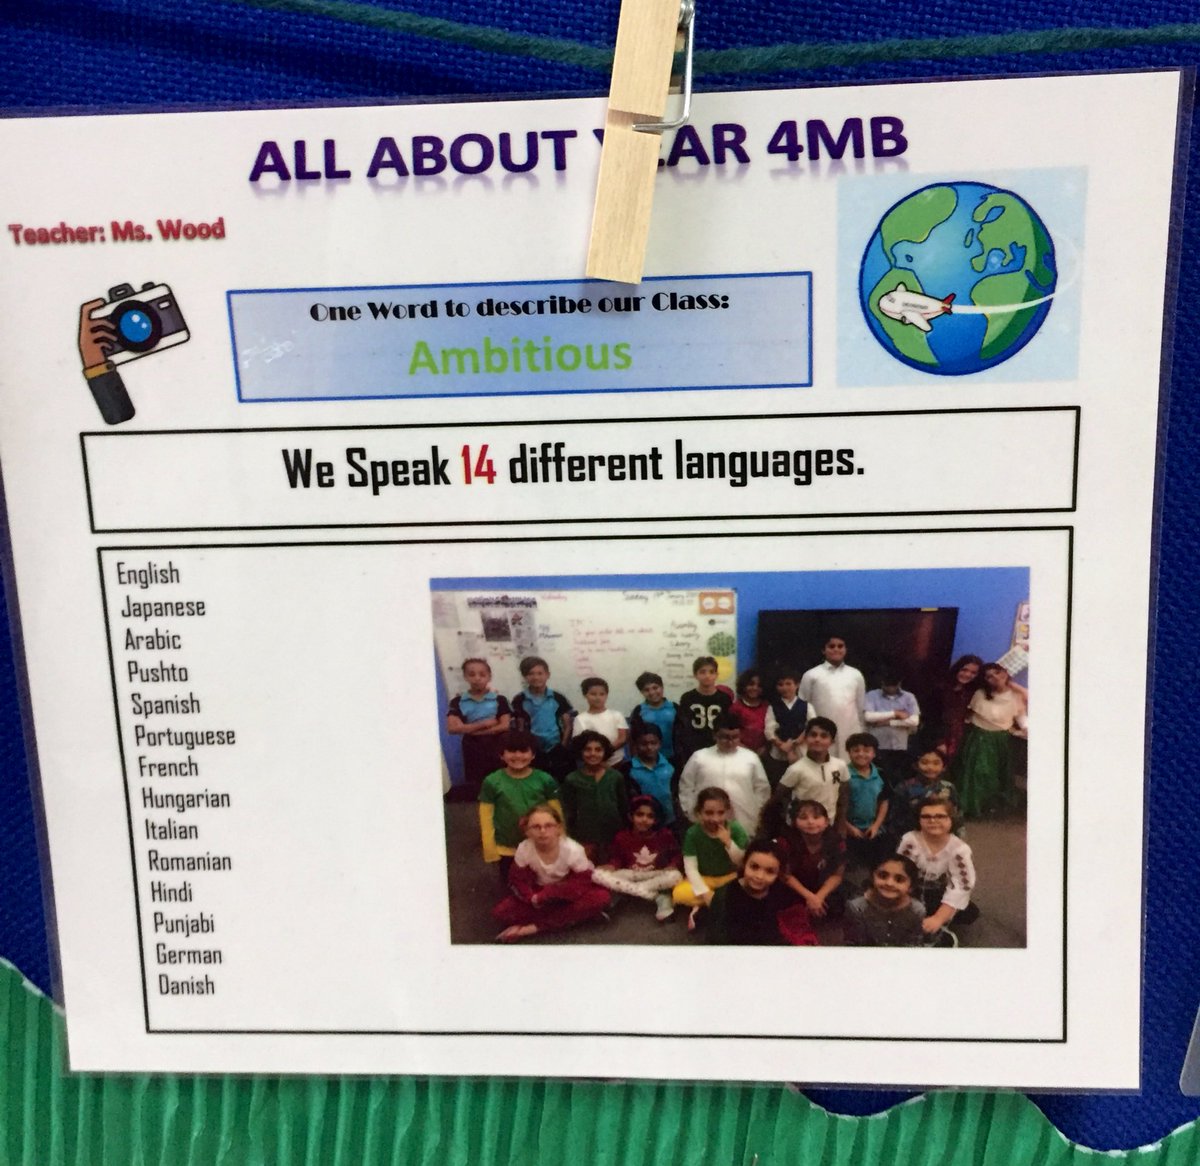 A great display from our @cisdoha EAL team celebrating the many different languages MK Primary students speak! @The_IPC #NAEBeAmbitious #multilingual #alllanguagesmatter #ellchat #edutwitter #esl #esl #ell